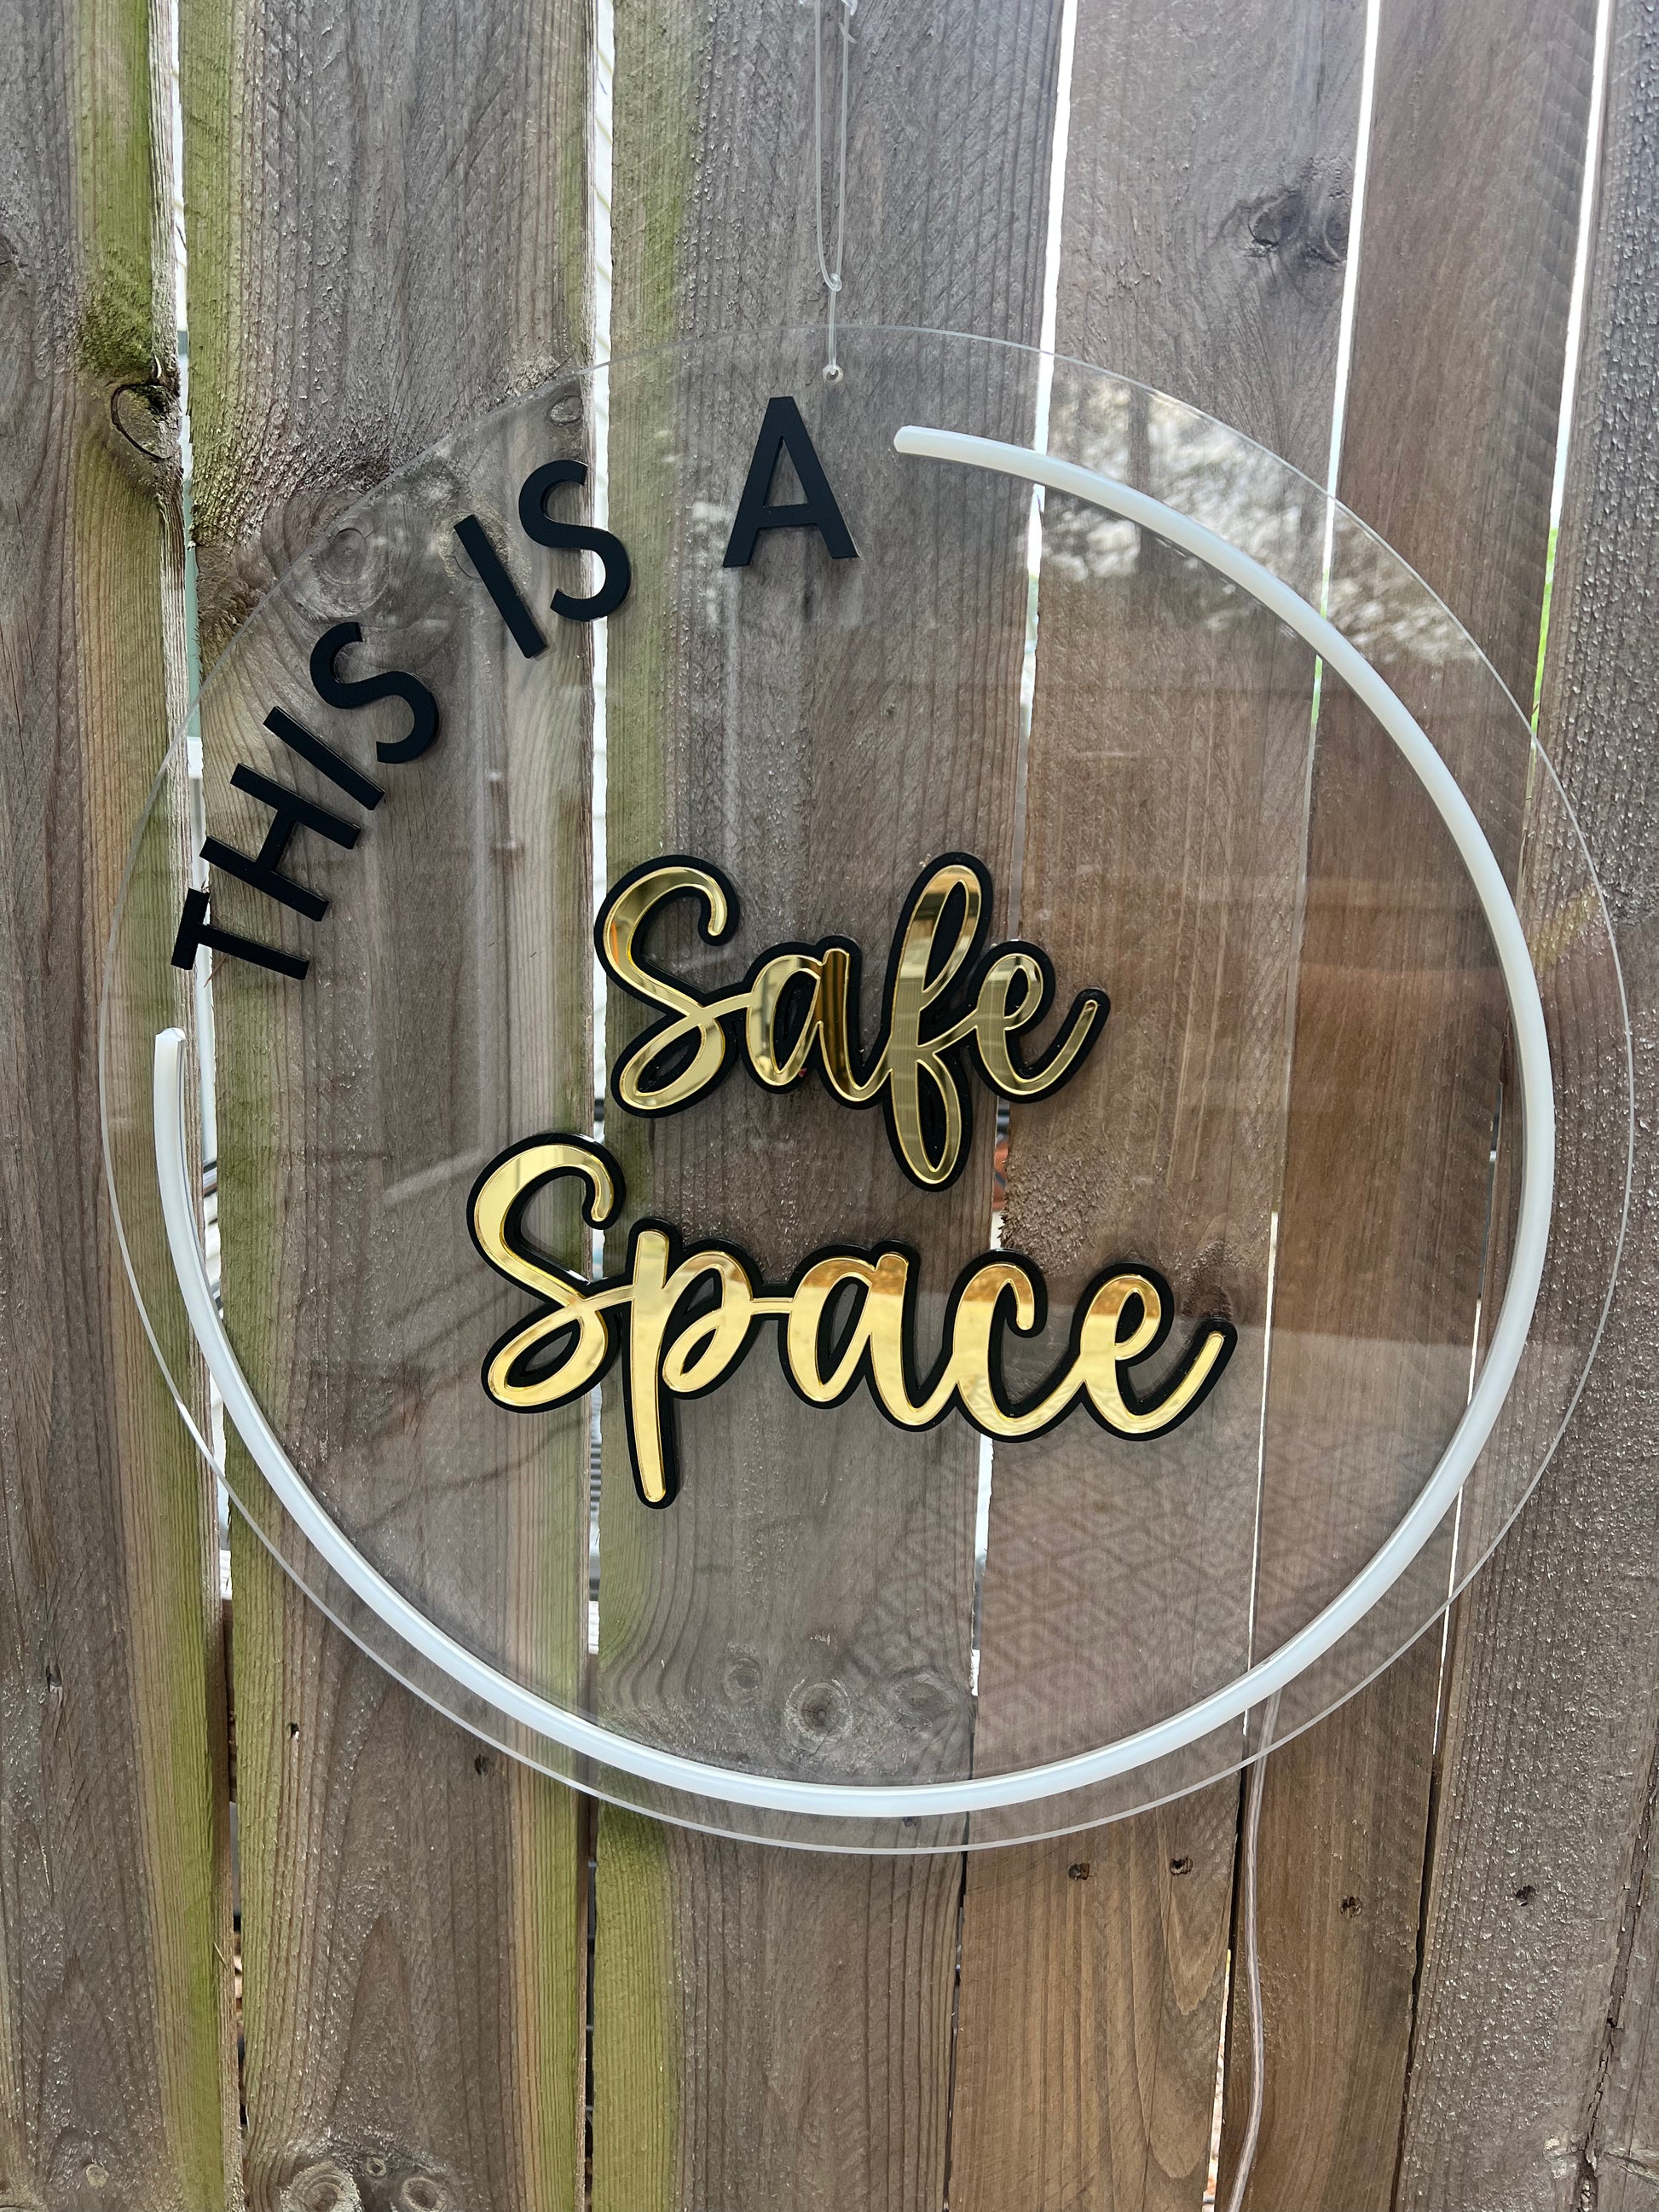 LED circular sign with the words 'This is a safe space' illuminated in vibrant white LED. Adds a welcoming and inclusive atmosphere to any environment.